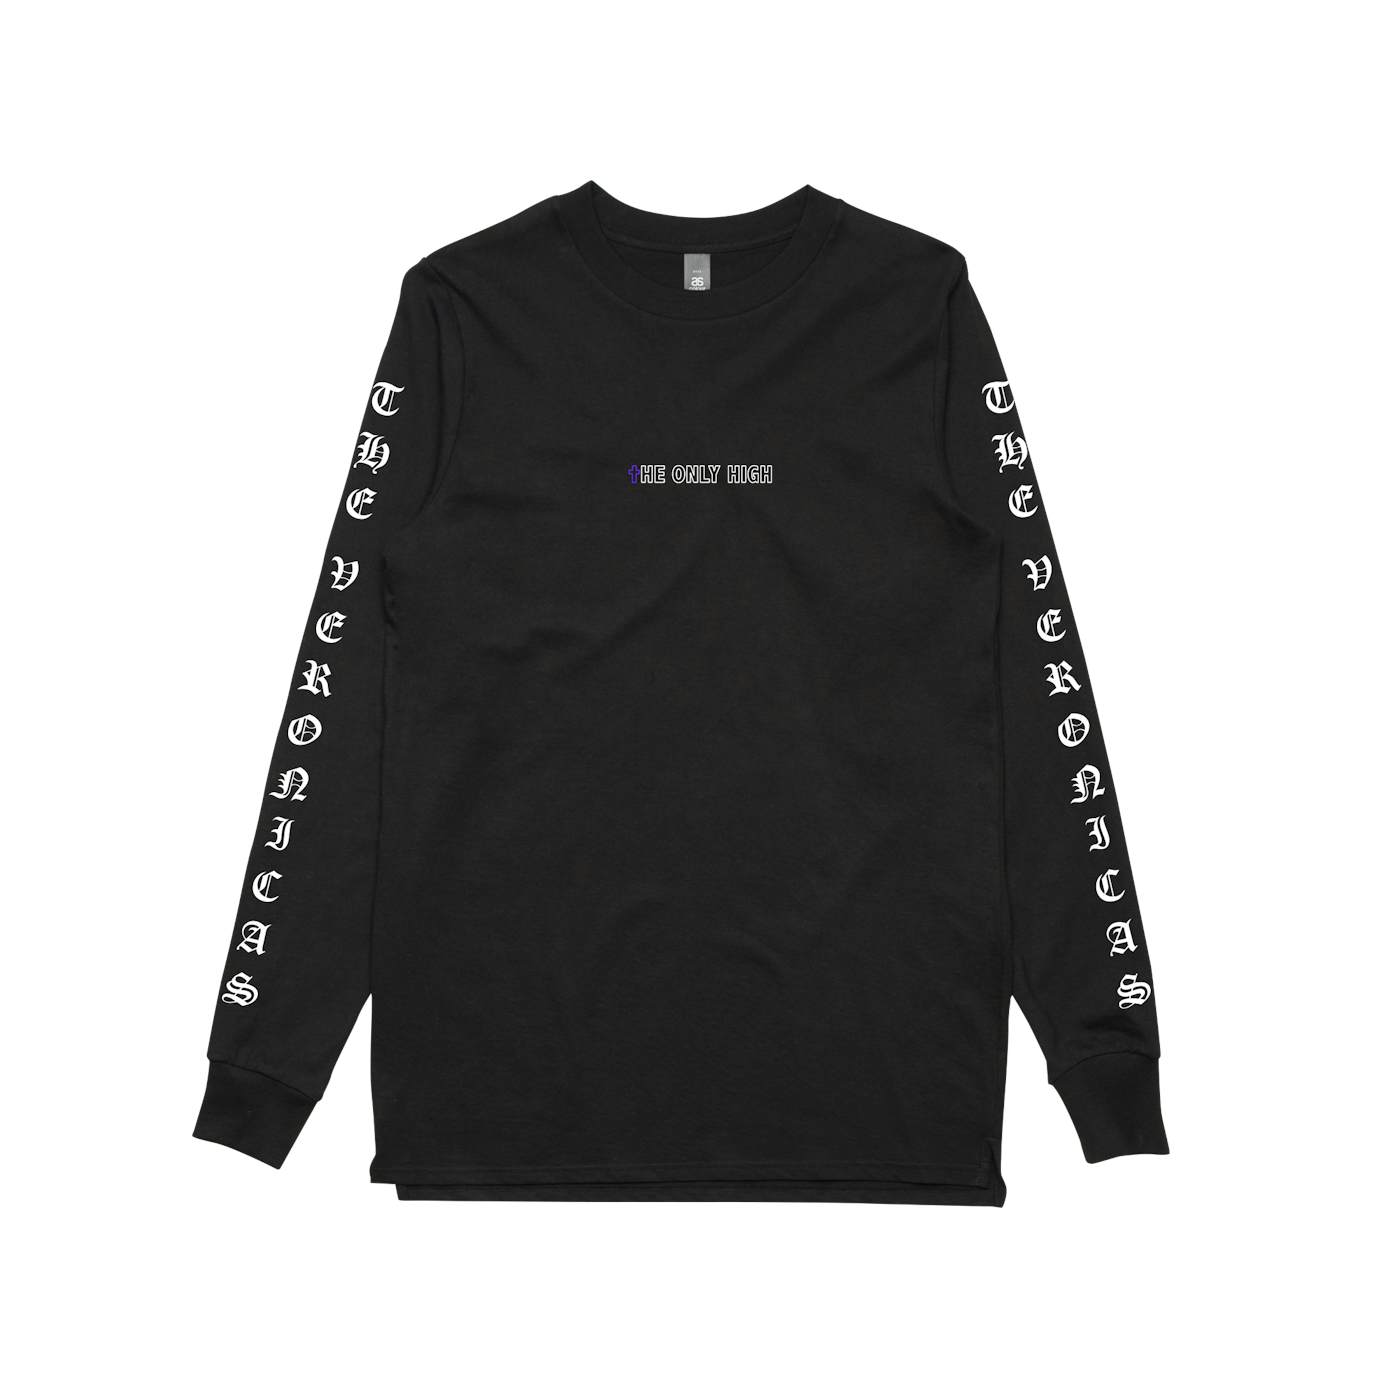 The Veronicas The Only High / Black Longsleeve T-shirt